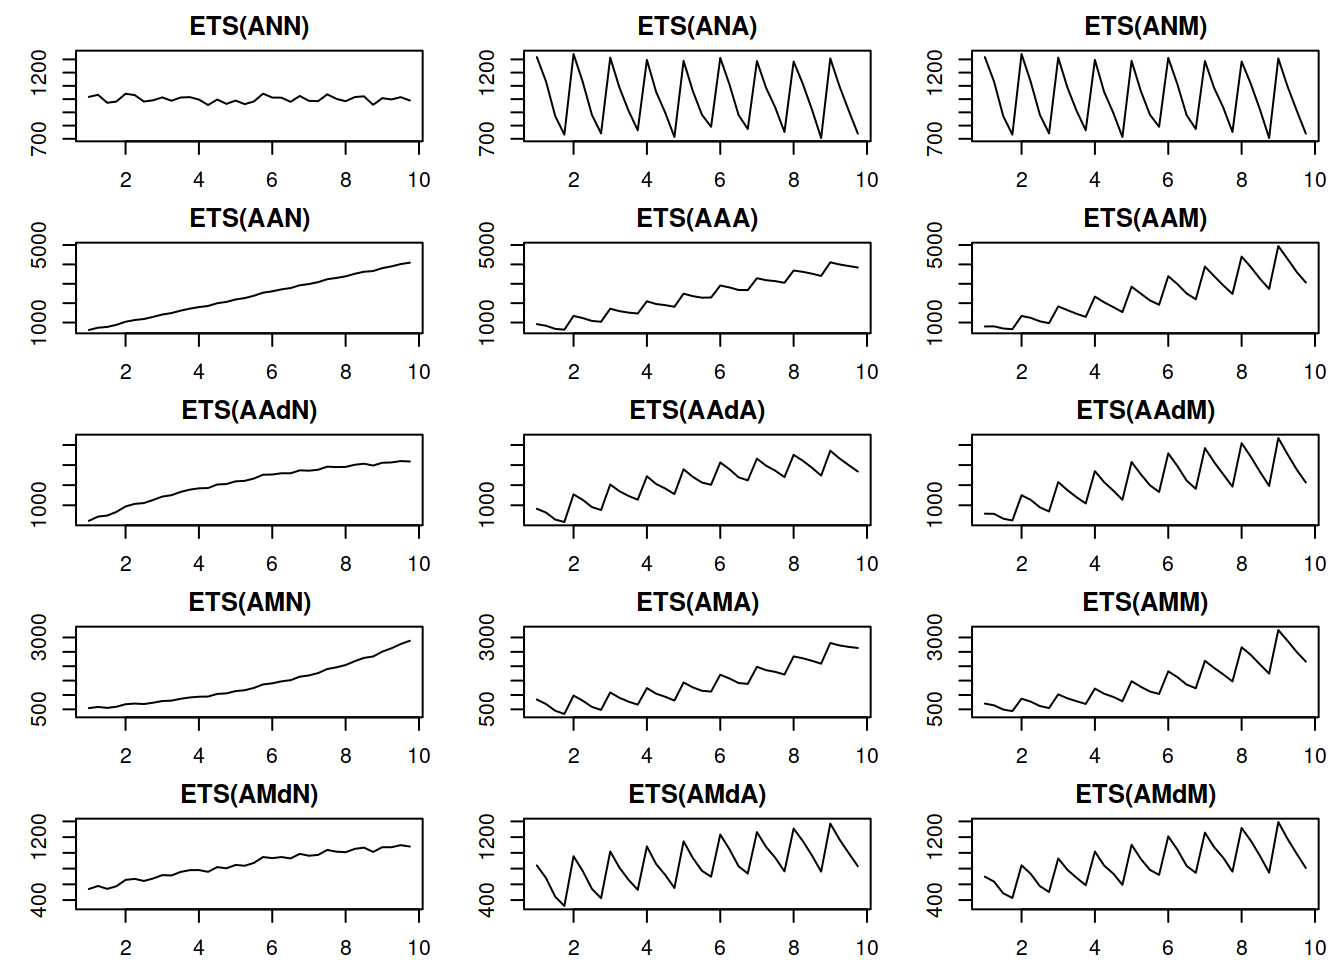 Time series corresponding to the additive error ETS models.